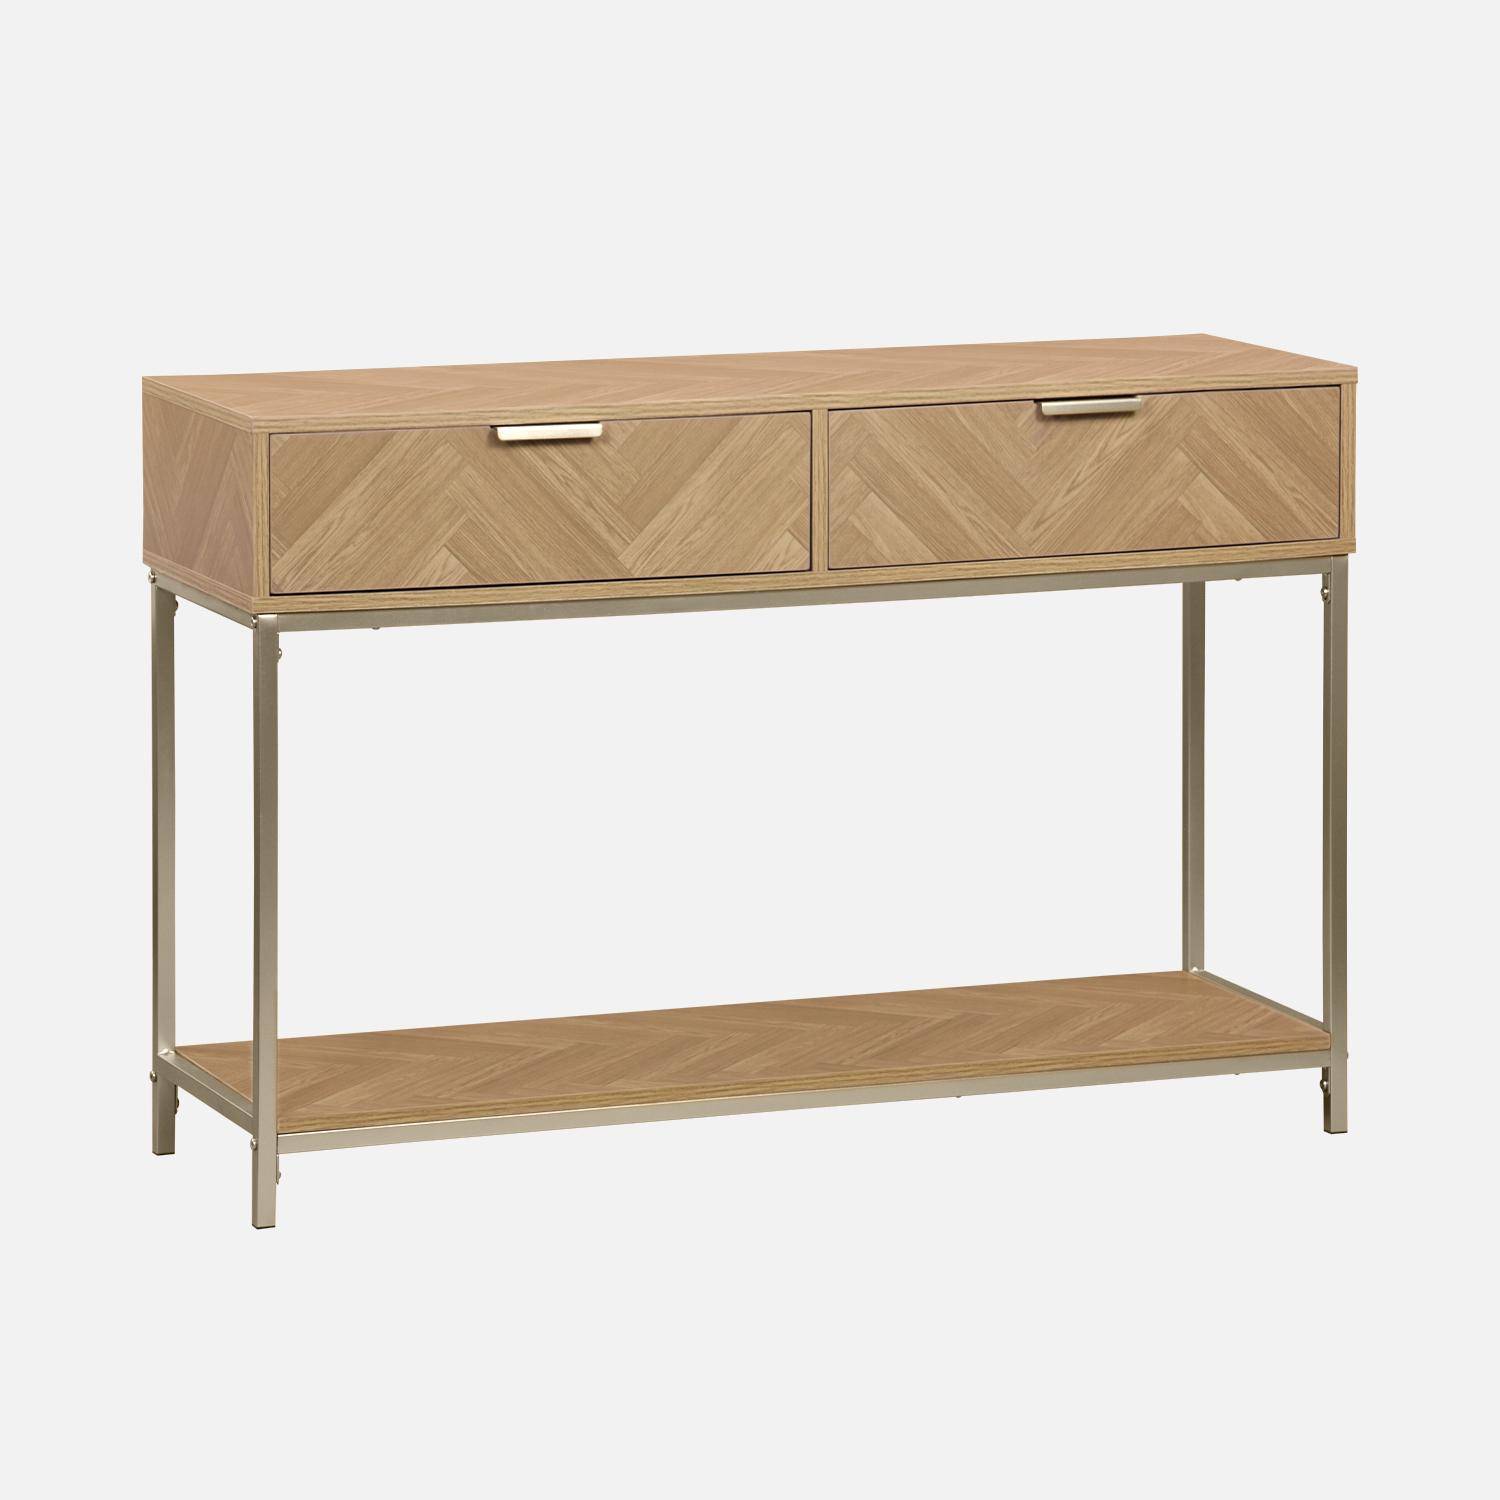 Herringbone hallway console table with 2 drawers, 110x35x75cm - Budapest - Natural,sweeek,Photo3